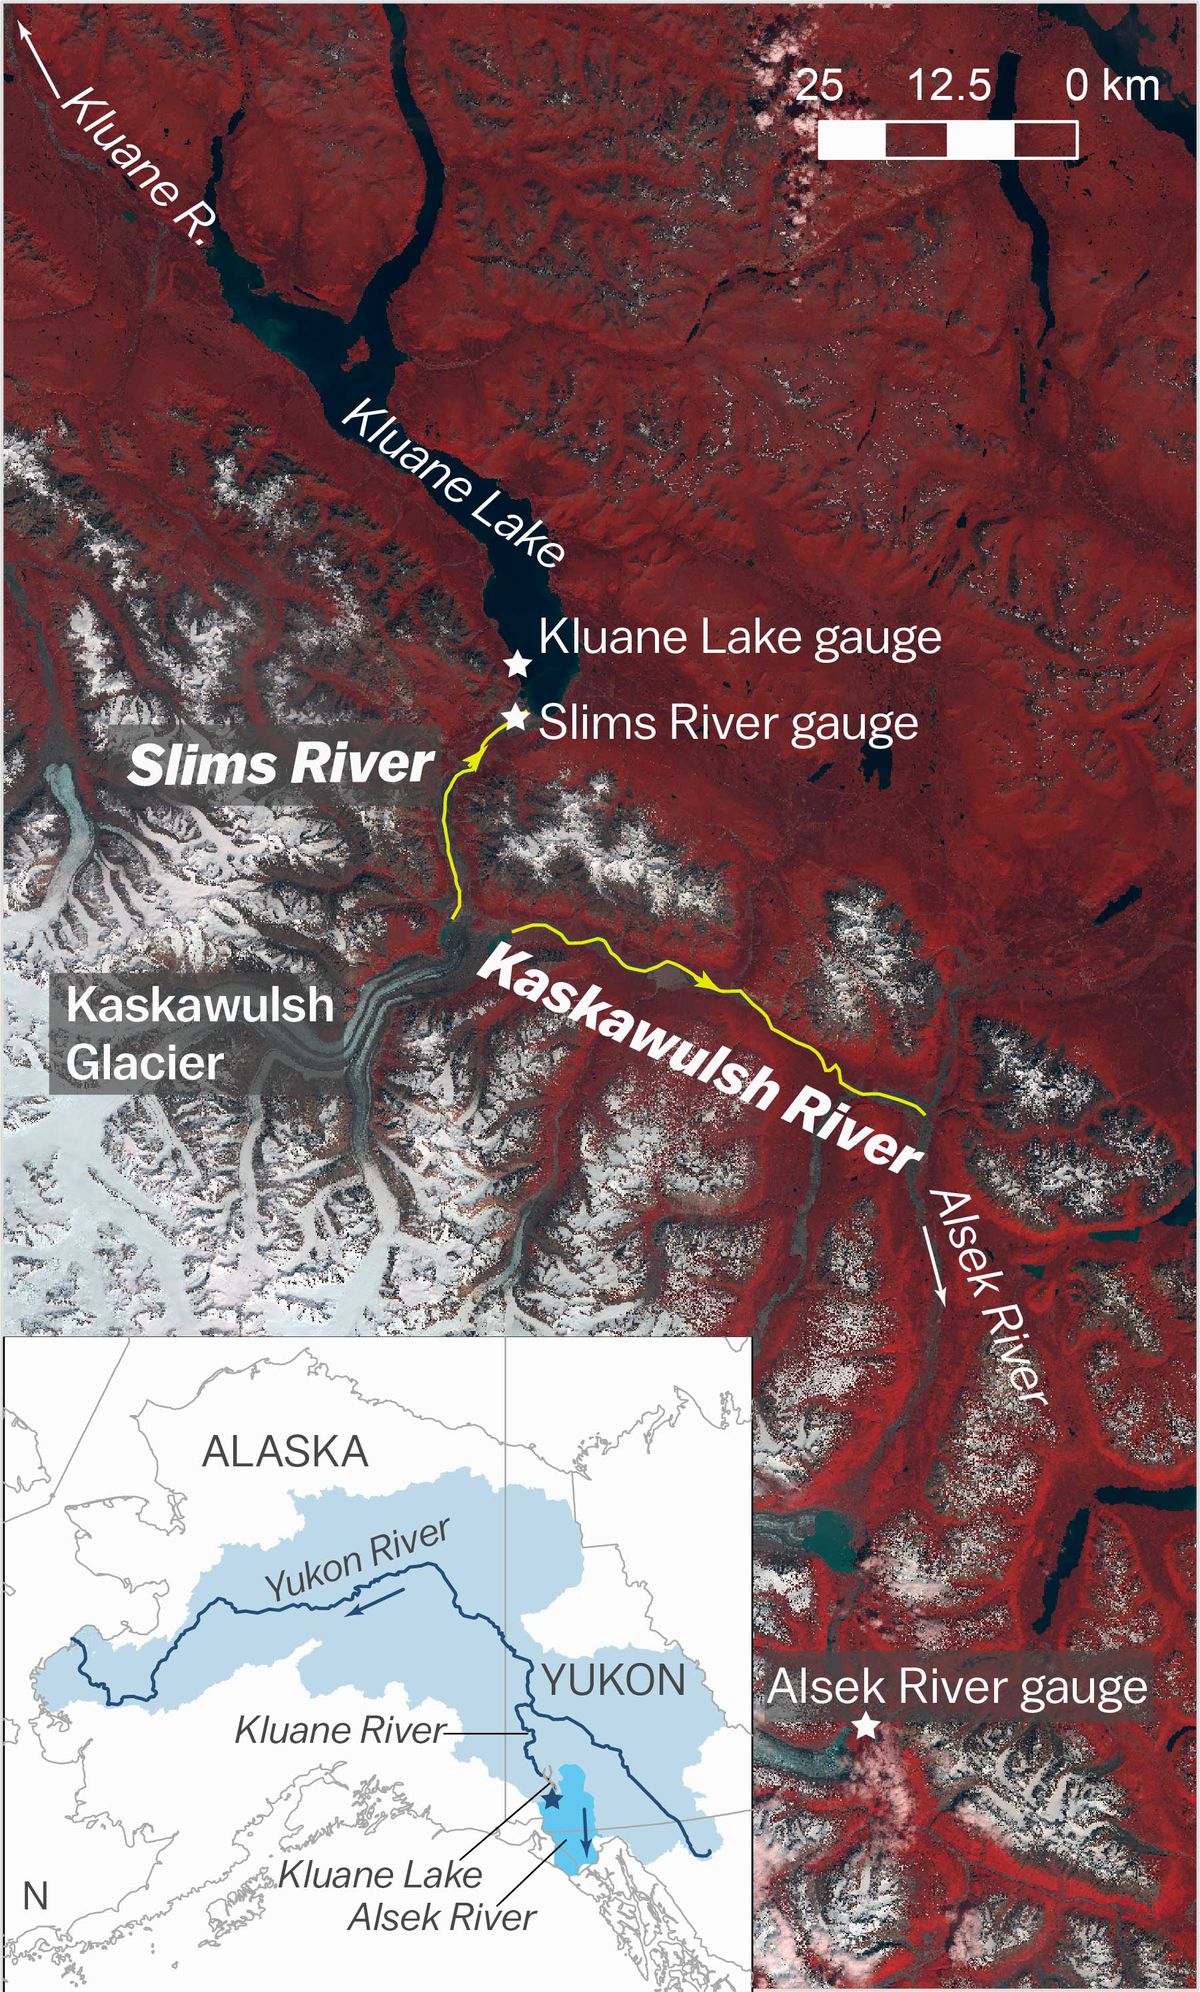 A satellite image of the Kaskawulsh glacier and Slims and Kaskawulsh rivers. The yellow lines represent the pre-2016 flow direction of the Slims and Kaskawulsh rivers.